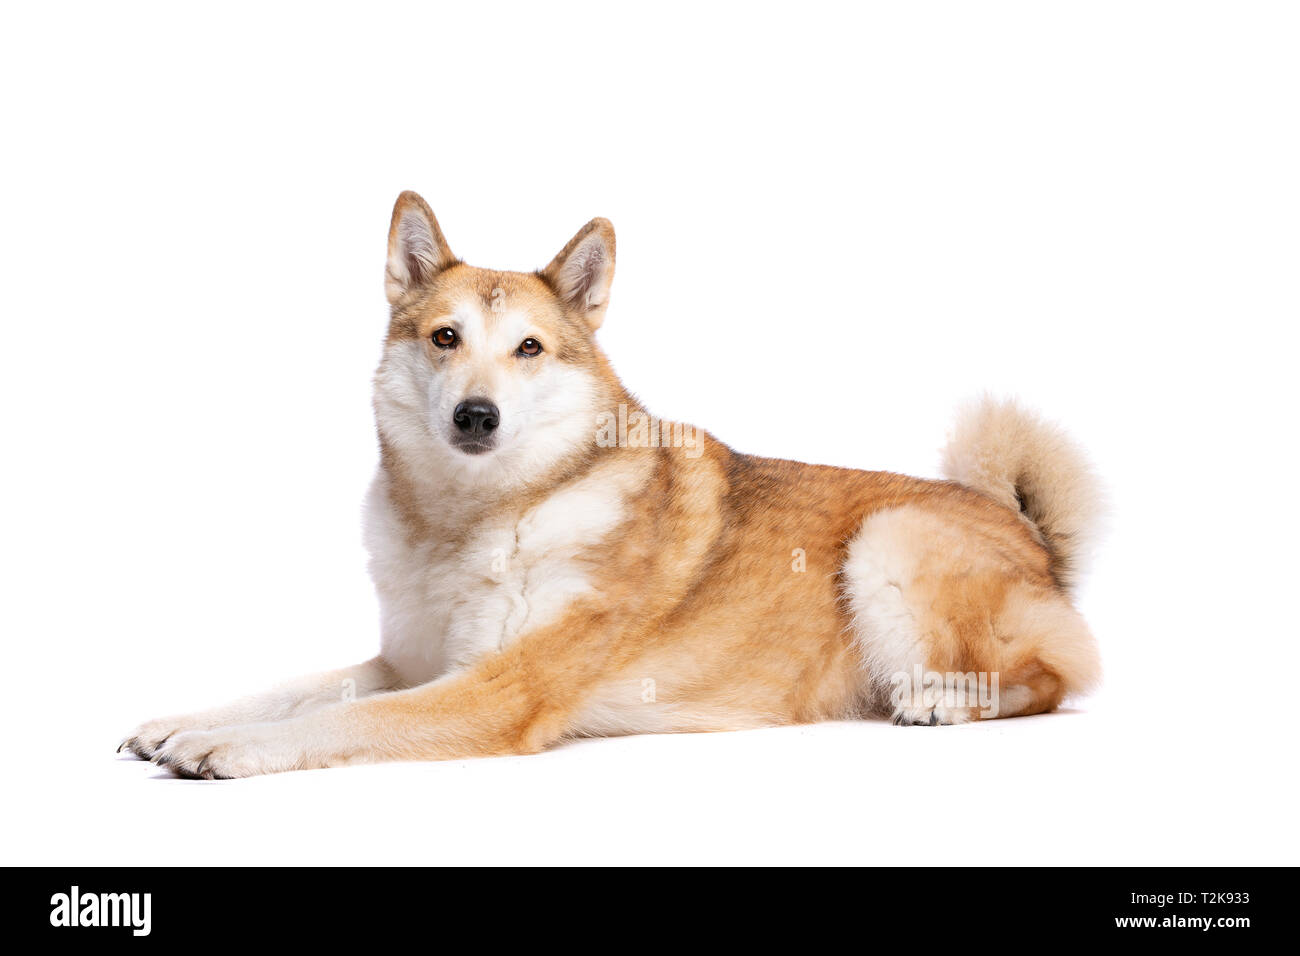 West Siberian Laika Dog In Front Of A White Background Stock Photo Alamy